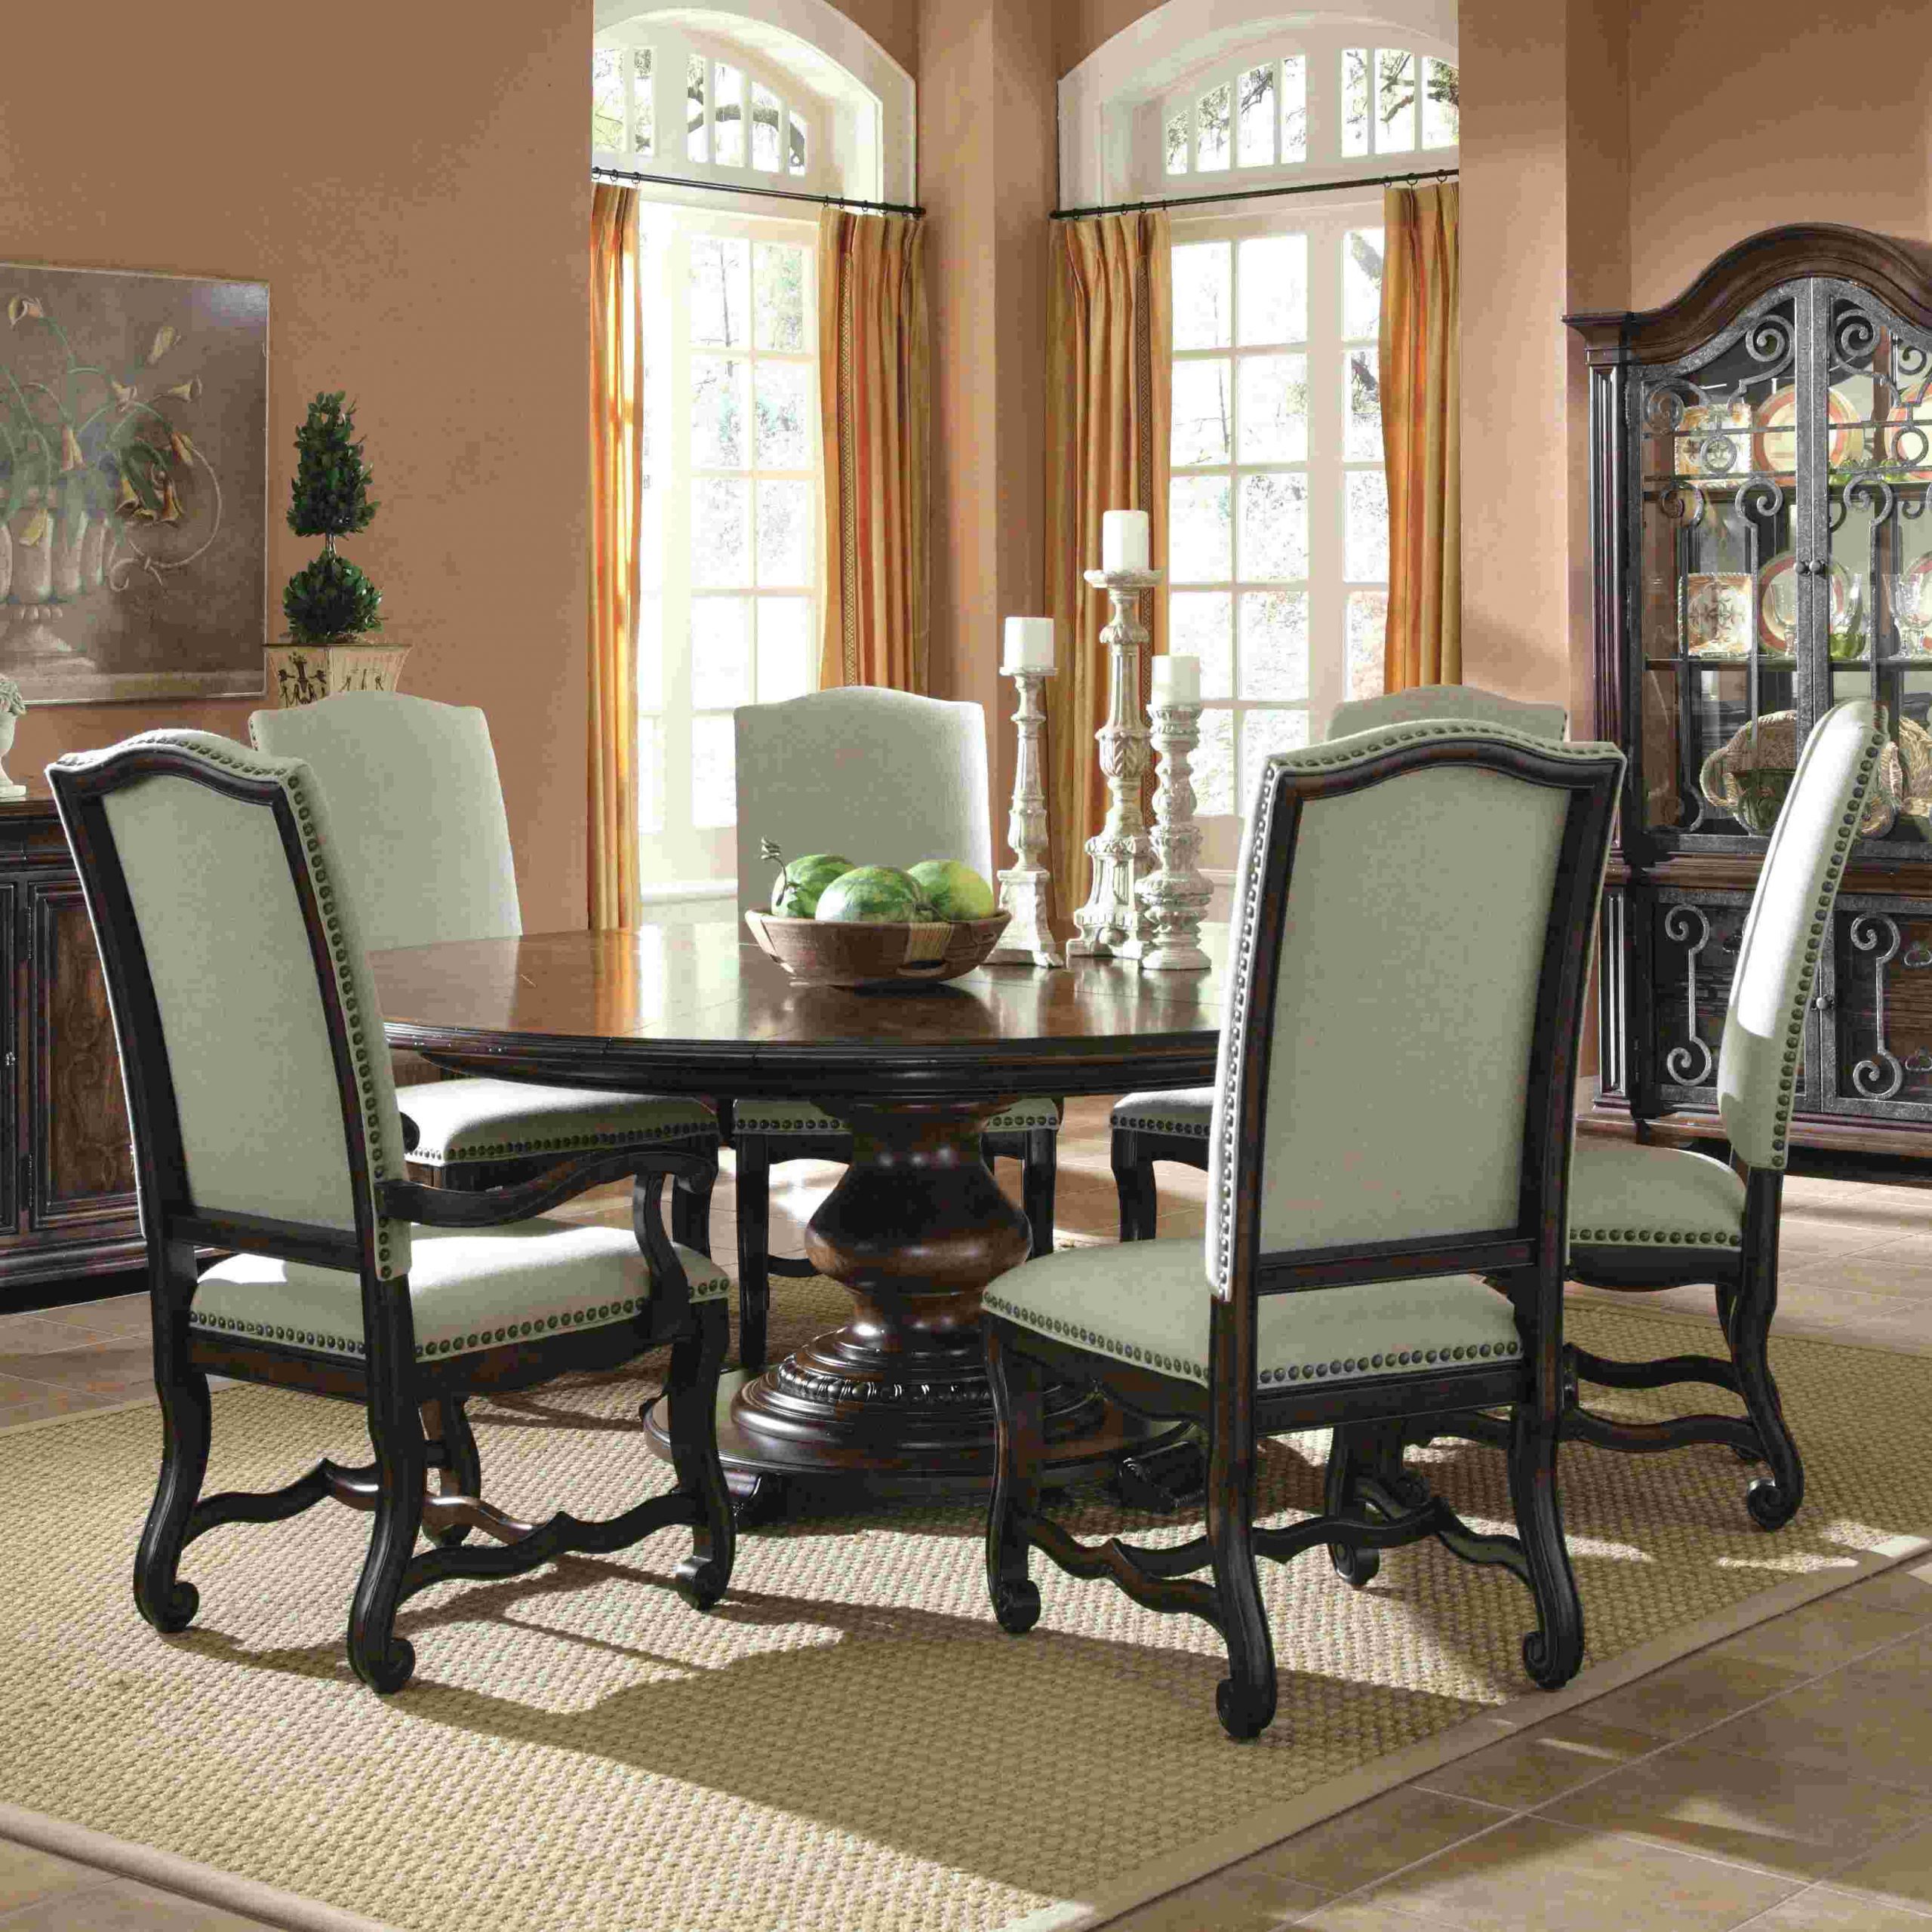 Dining Room Chairs Gumtree Cape Town Elegant Dining Room within size 3221 X 3221